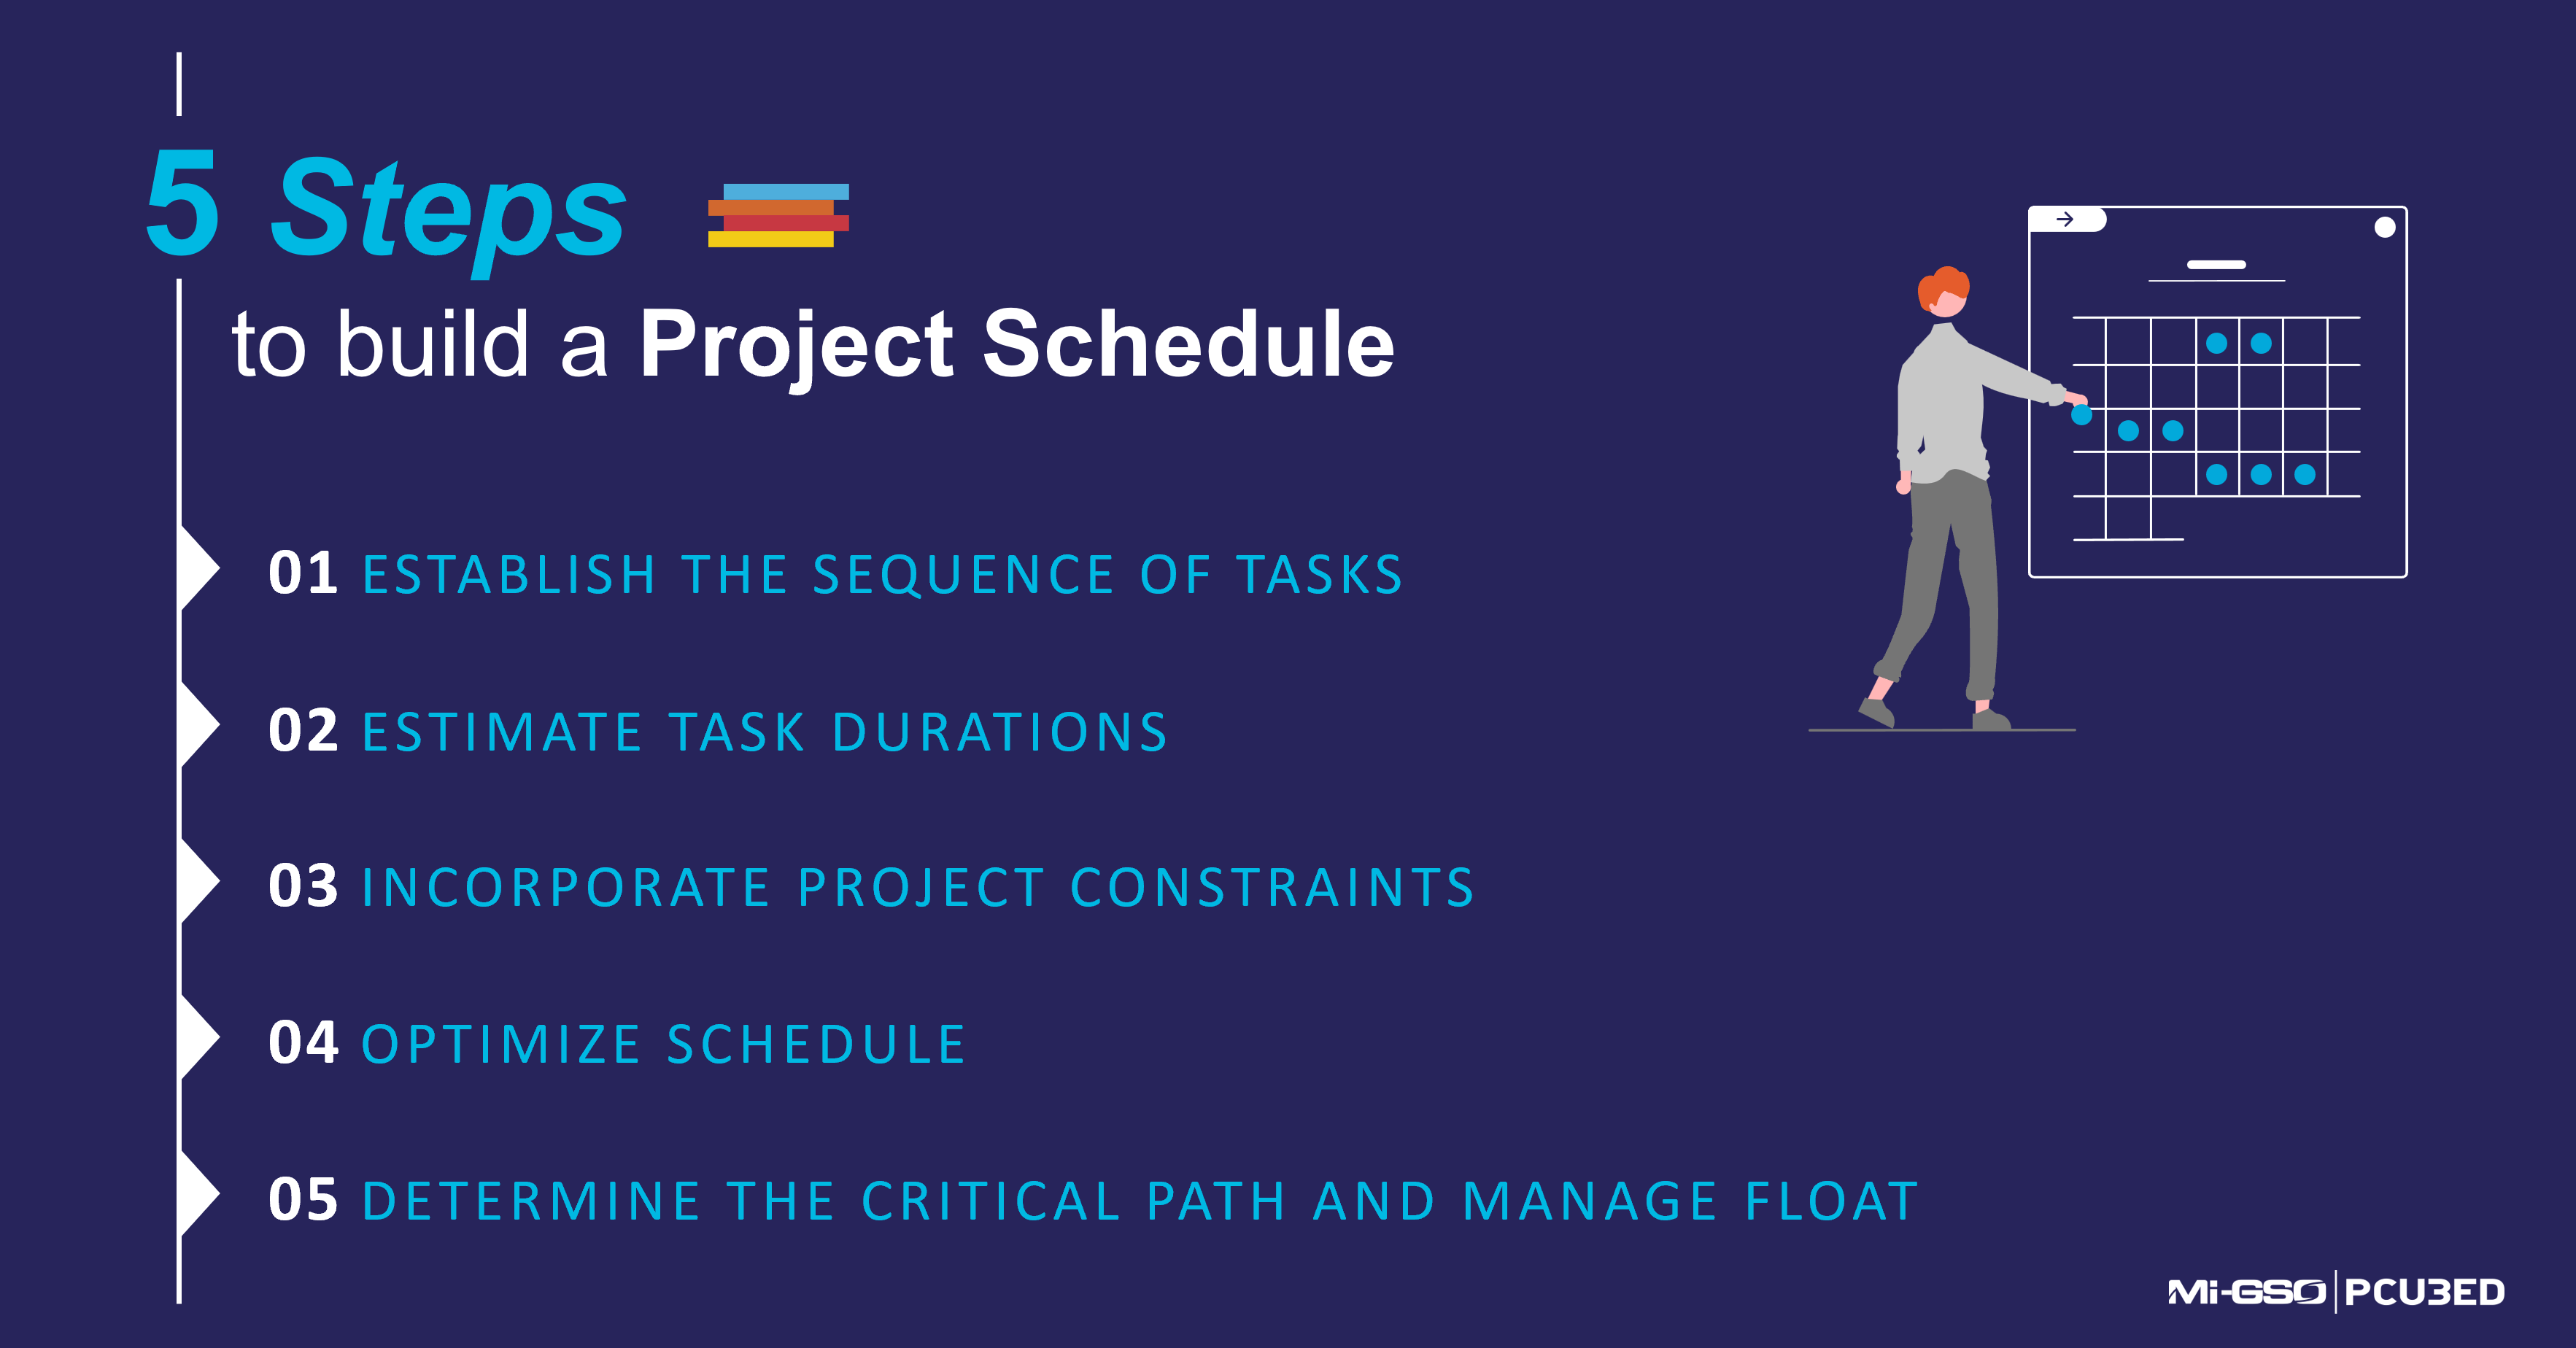 How to create a project schedule in 5 steps